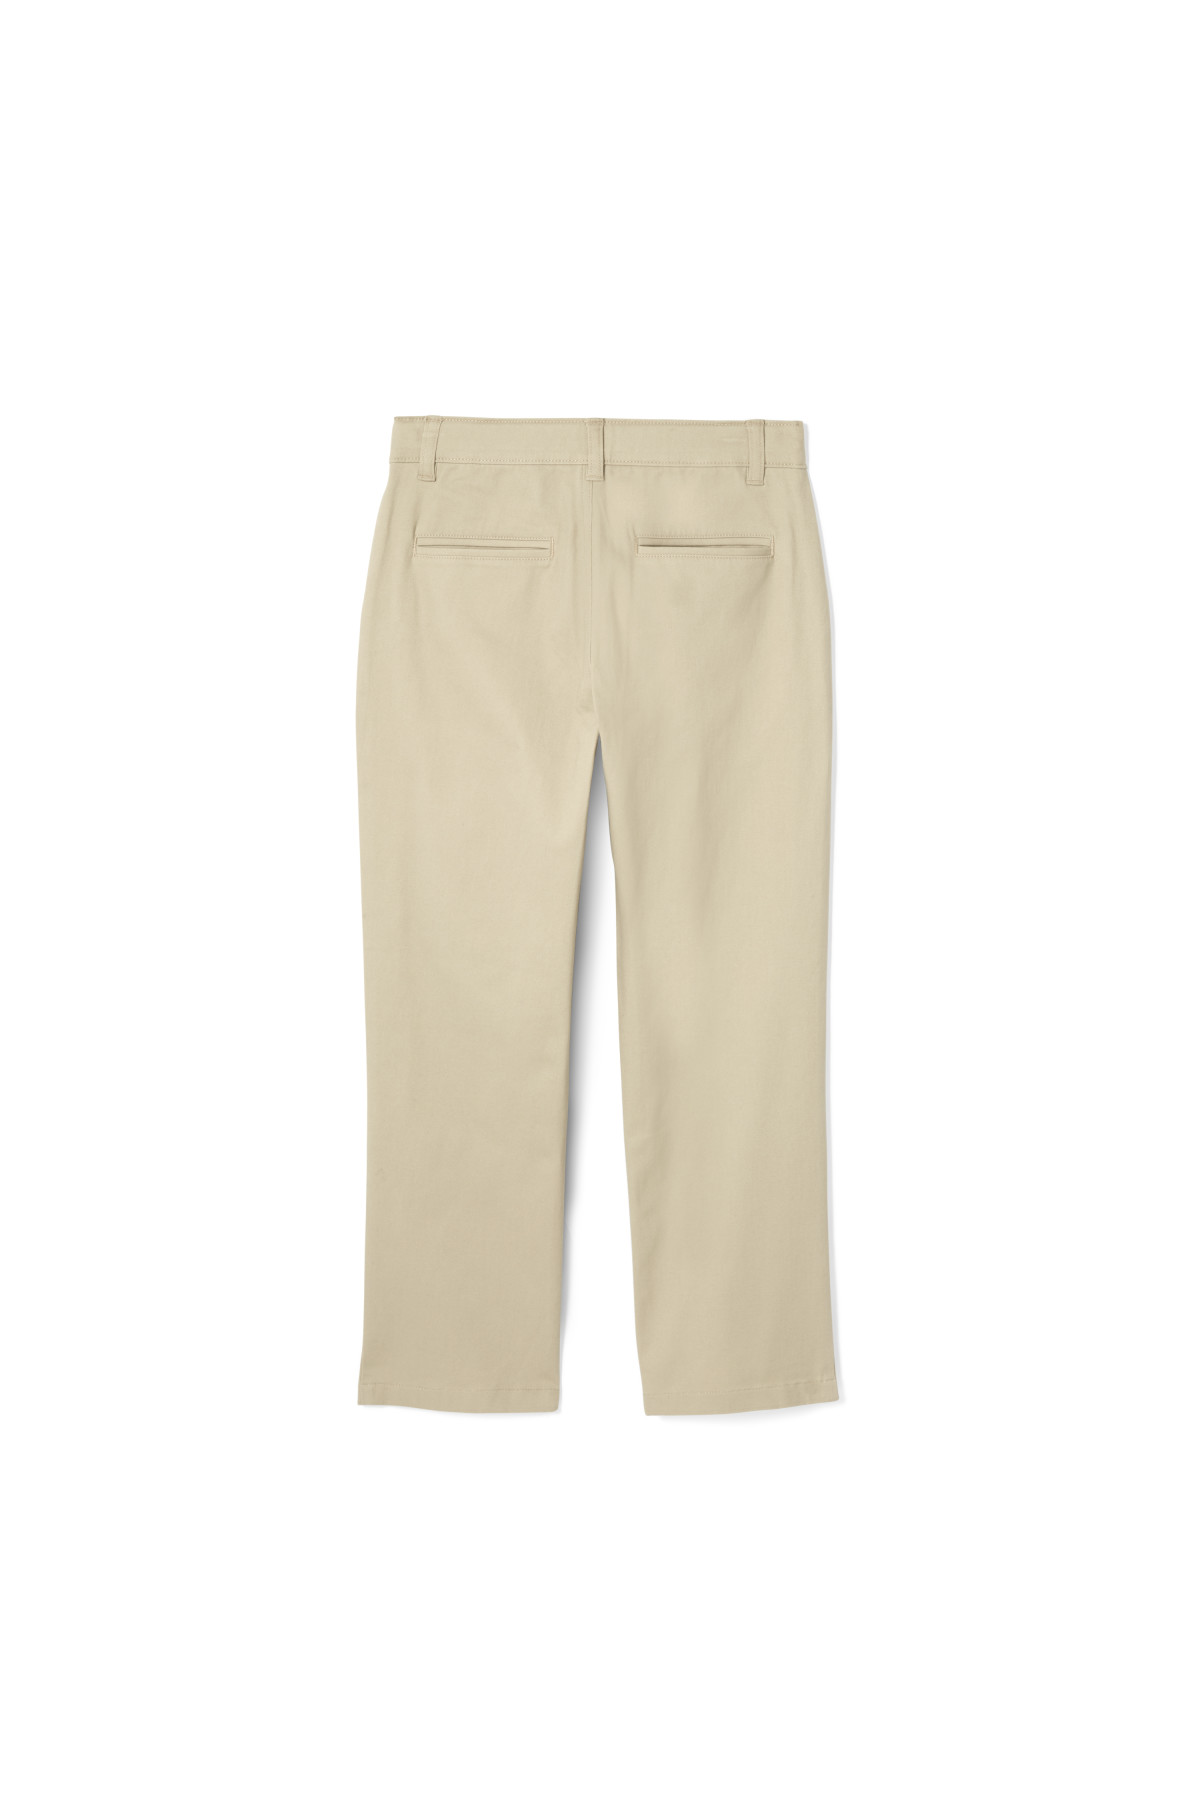 French Toast Girls' Pull-On Pants 